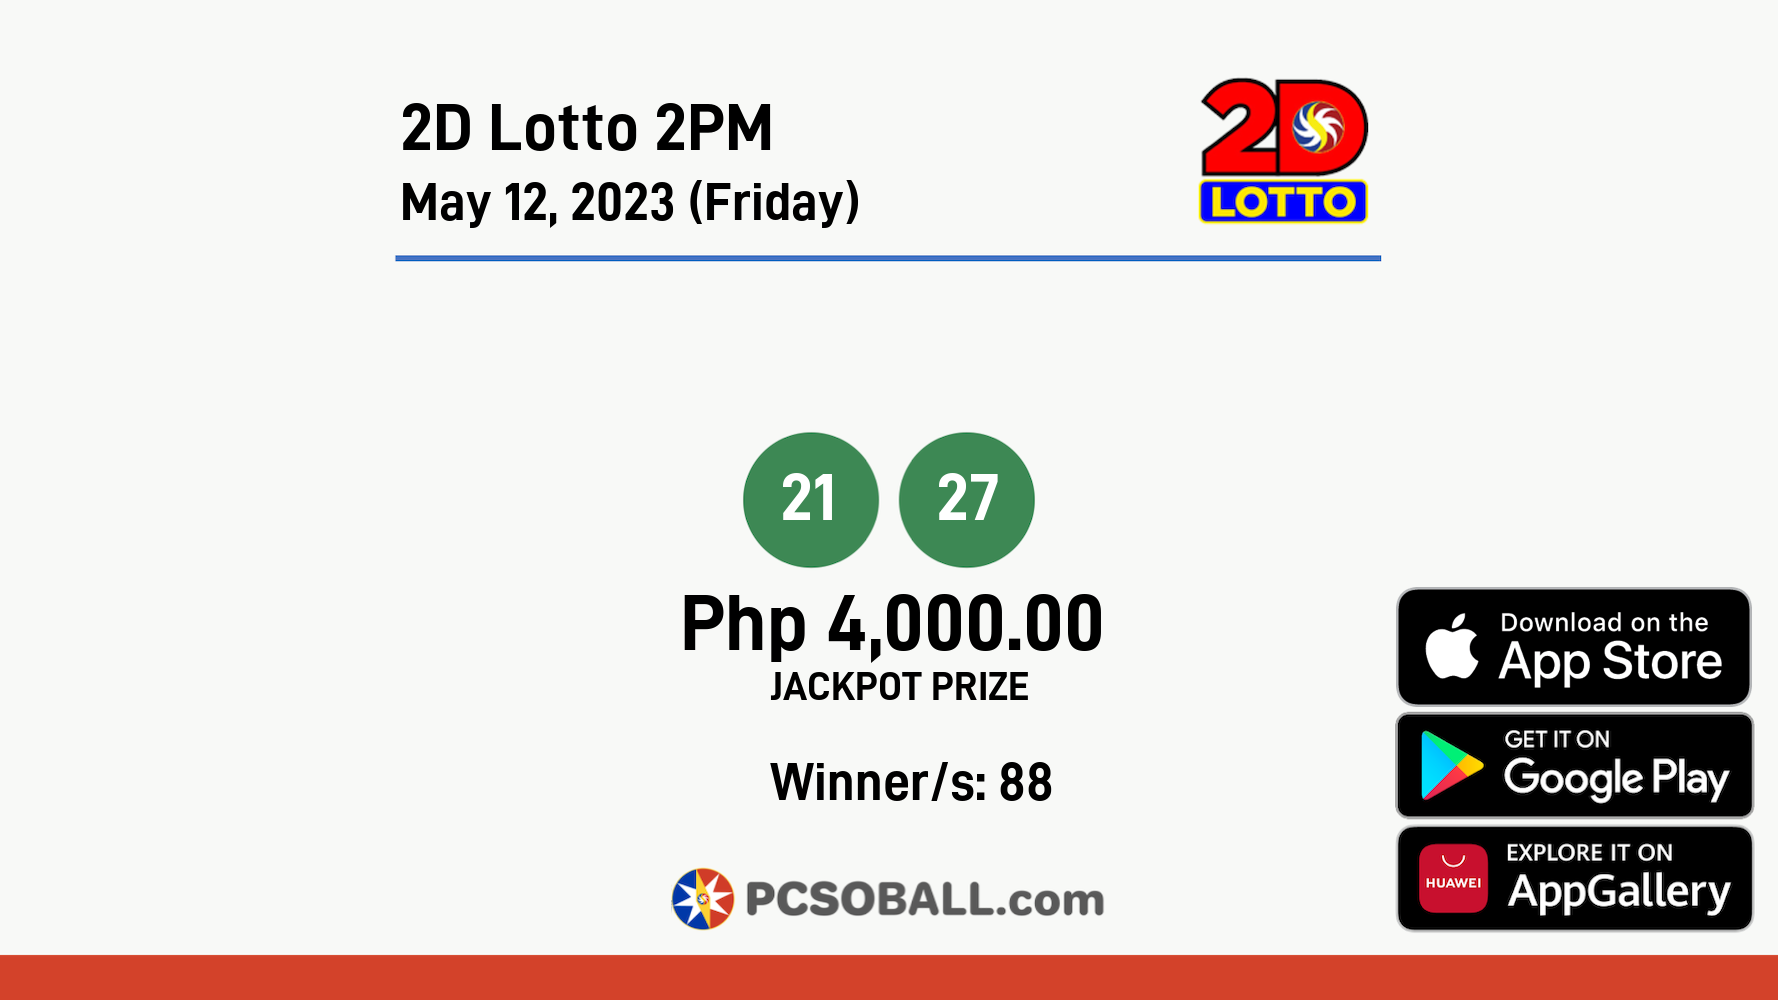 2D Lotto 2PM May 12, 2023 (Friday) Result